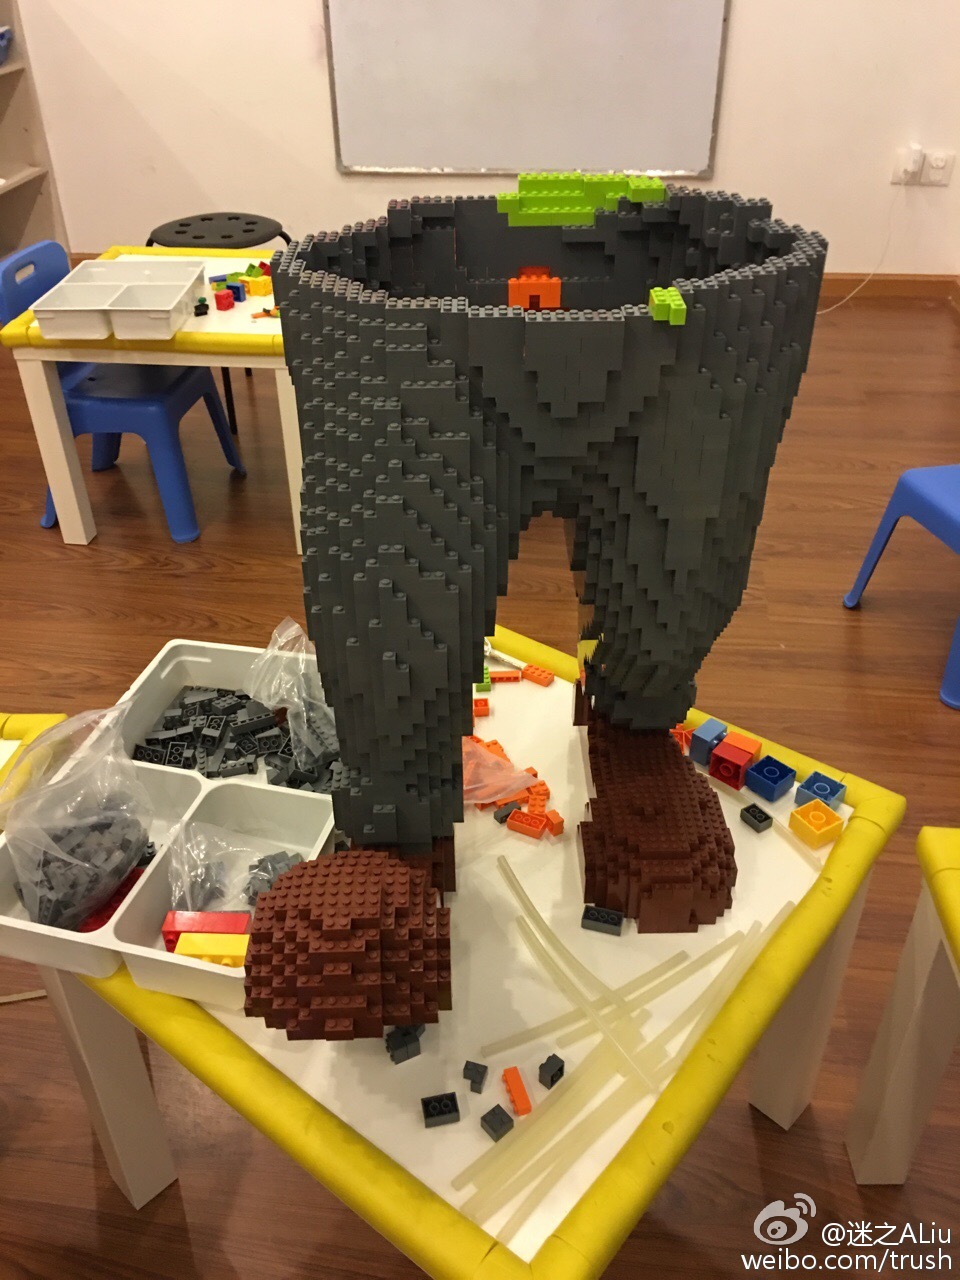 Man Spends Days Making Zootopia LEGO Statue, Child Destroys It In Seconds